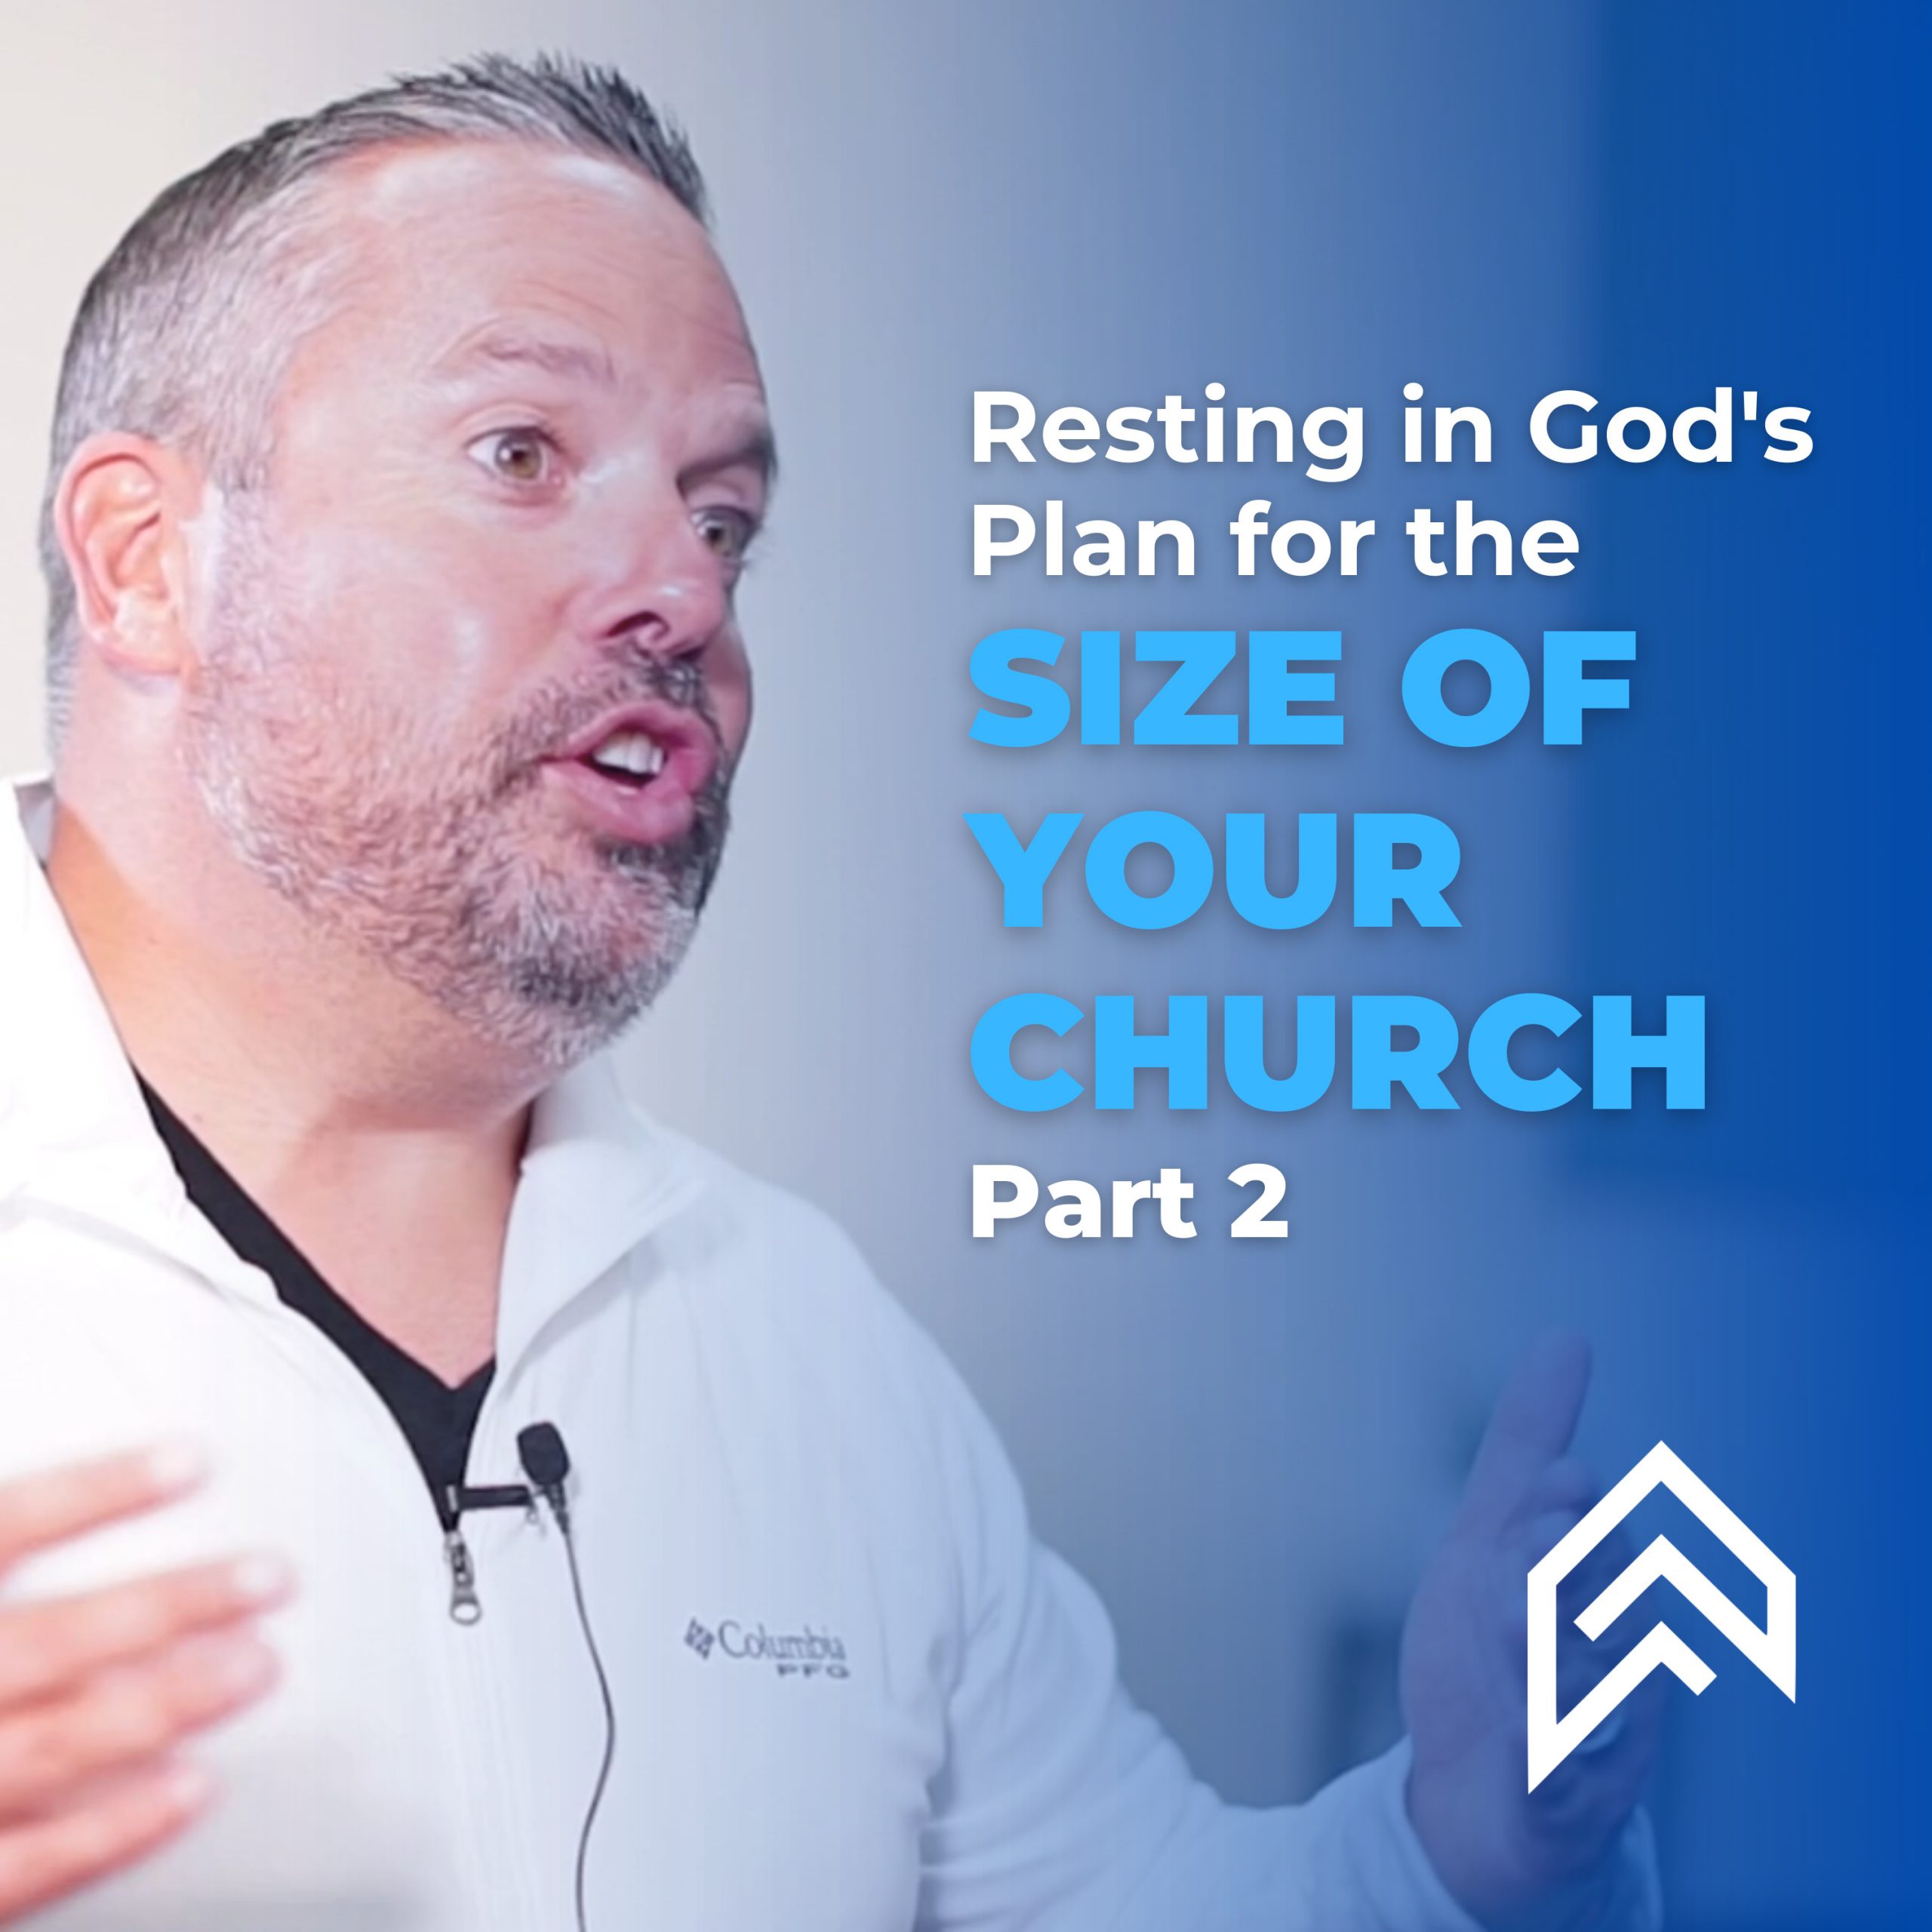 Resting in God’s Plan for the Size of Your Church (Part 2)